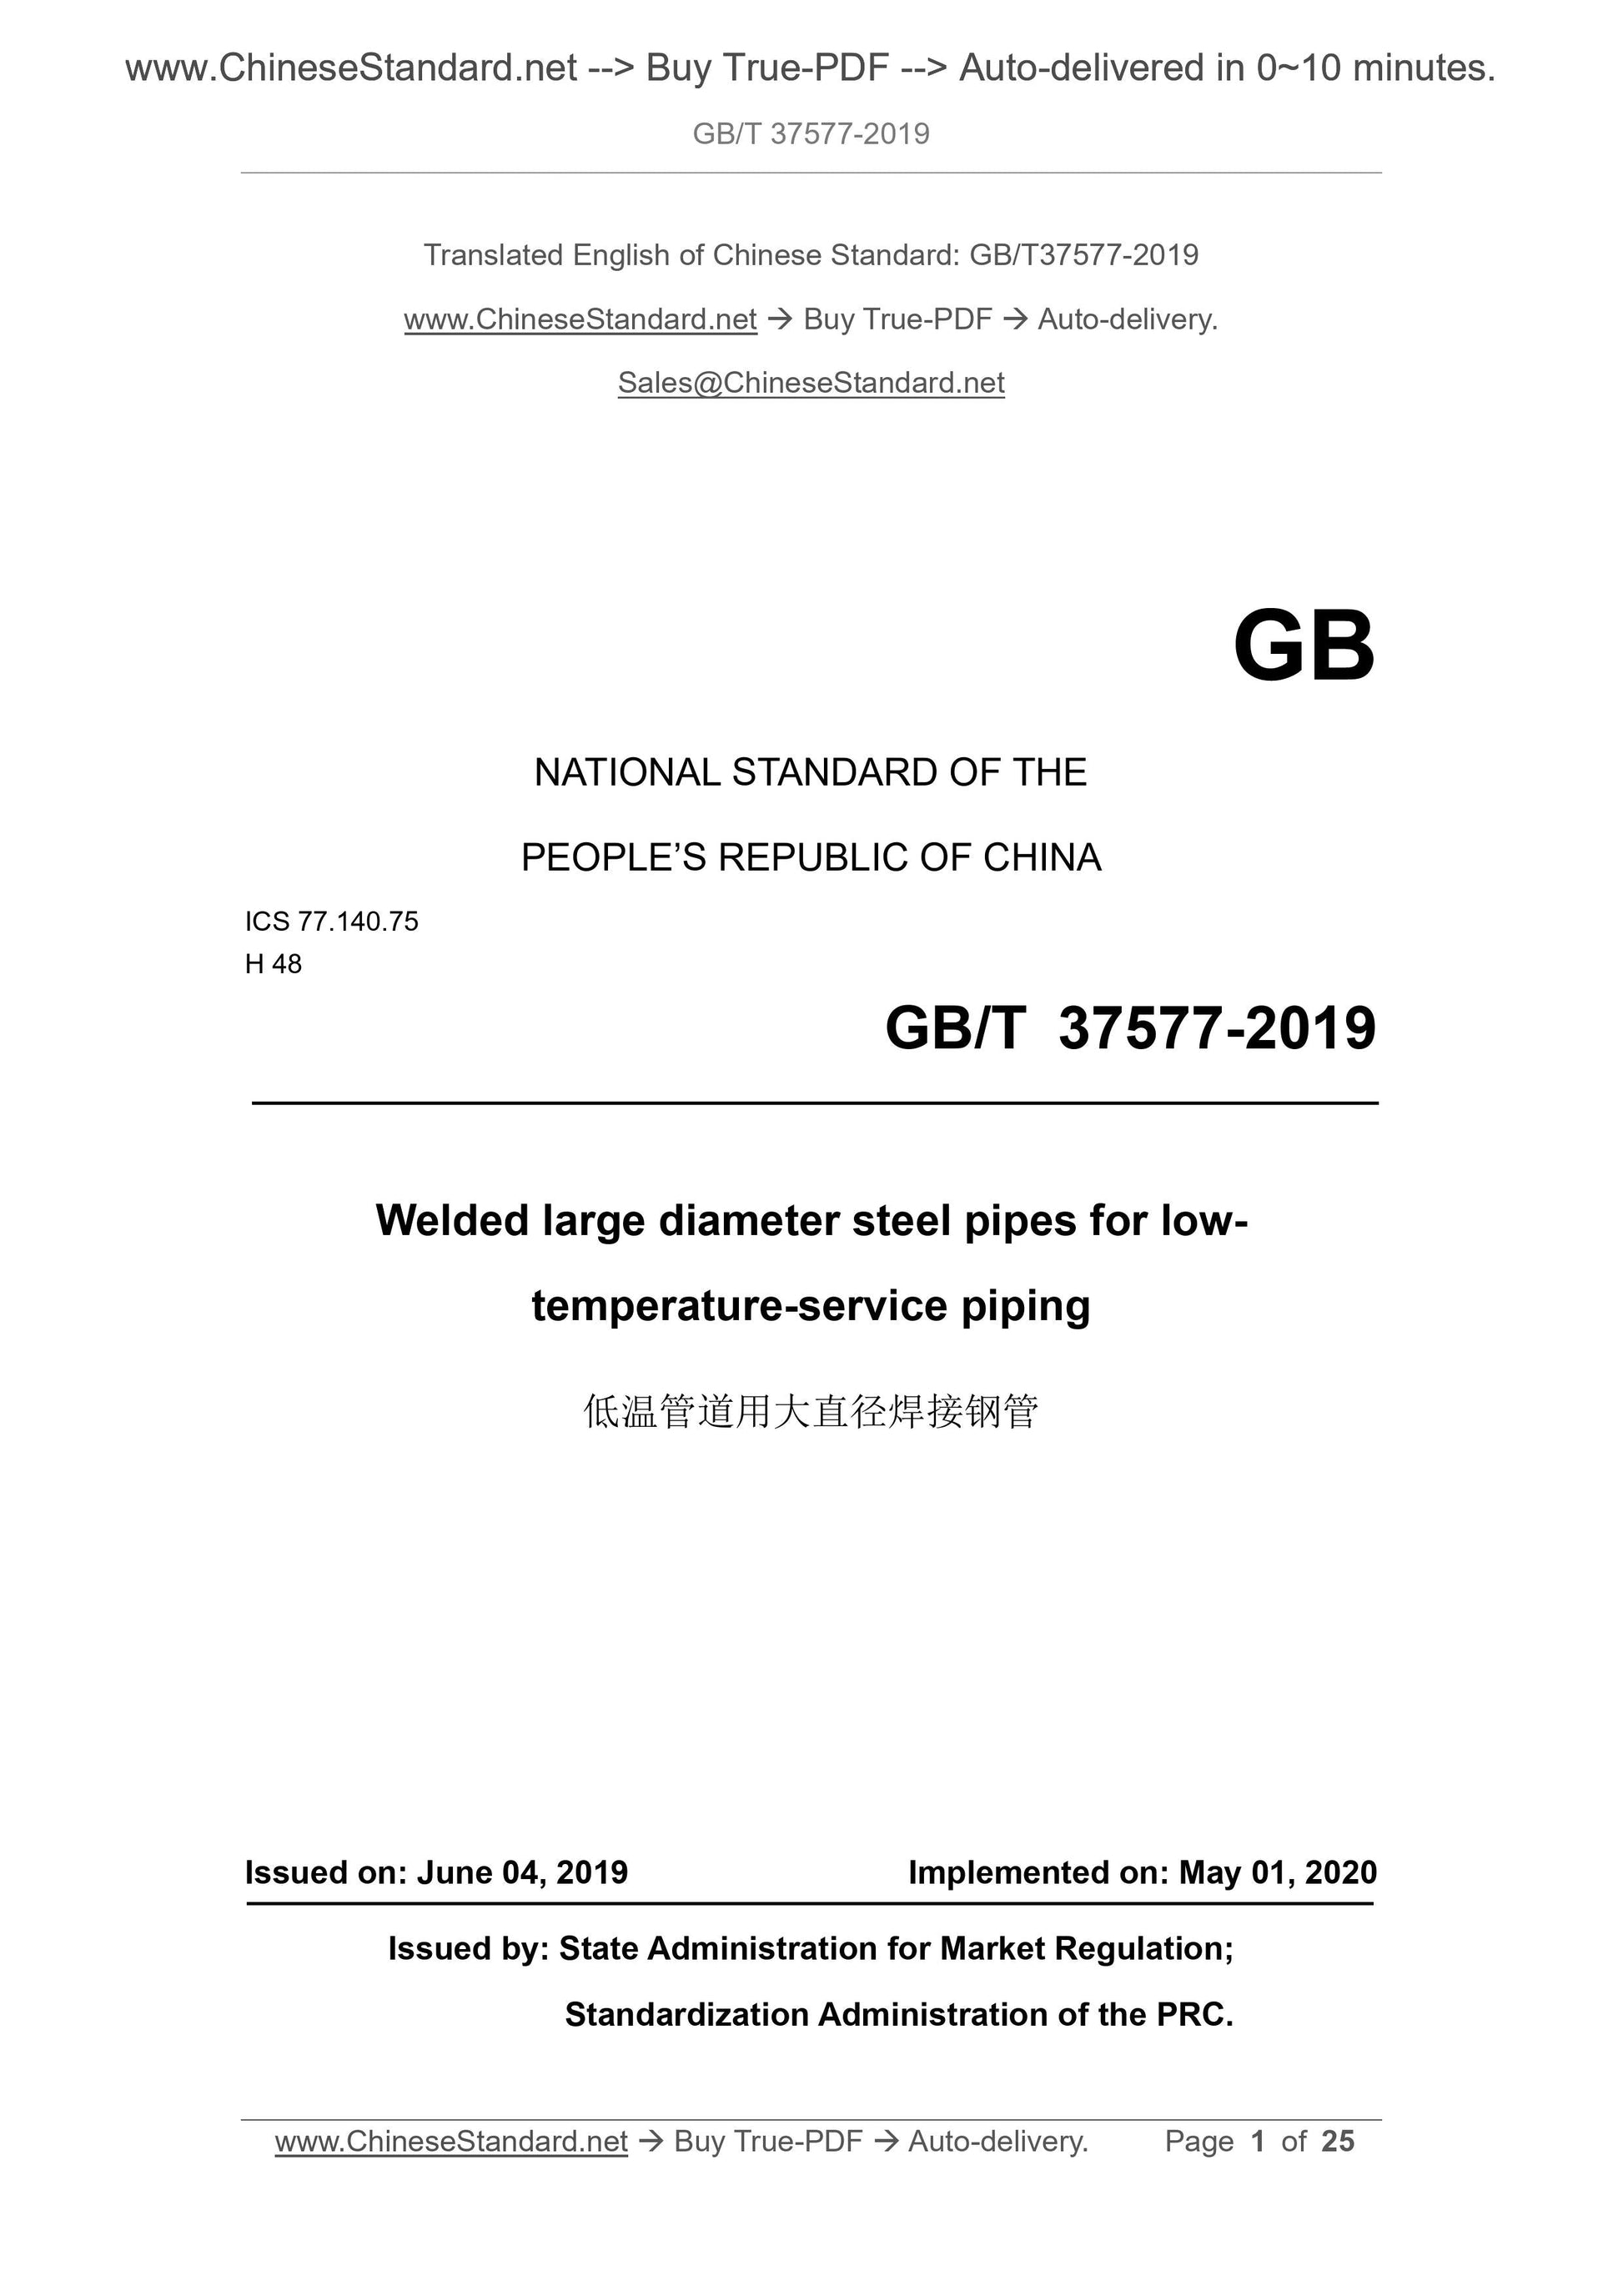 GB/T 37577-2019 Page 1